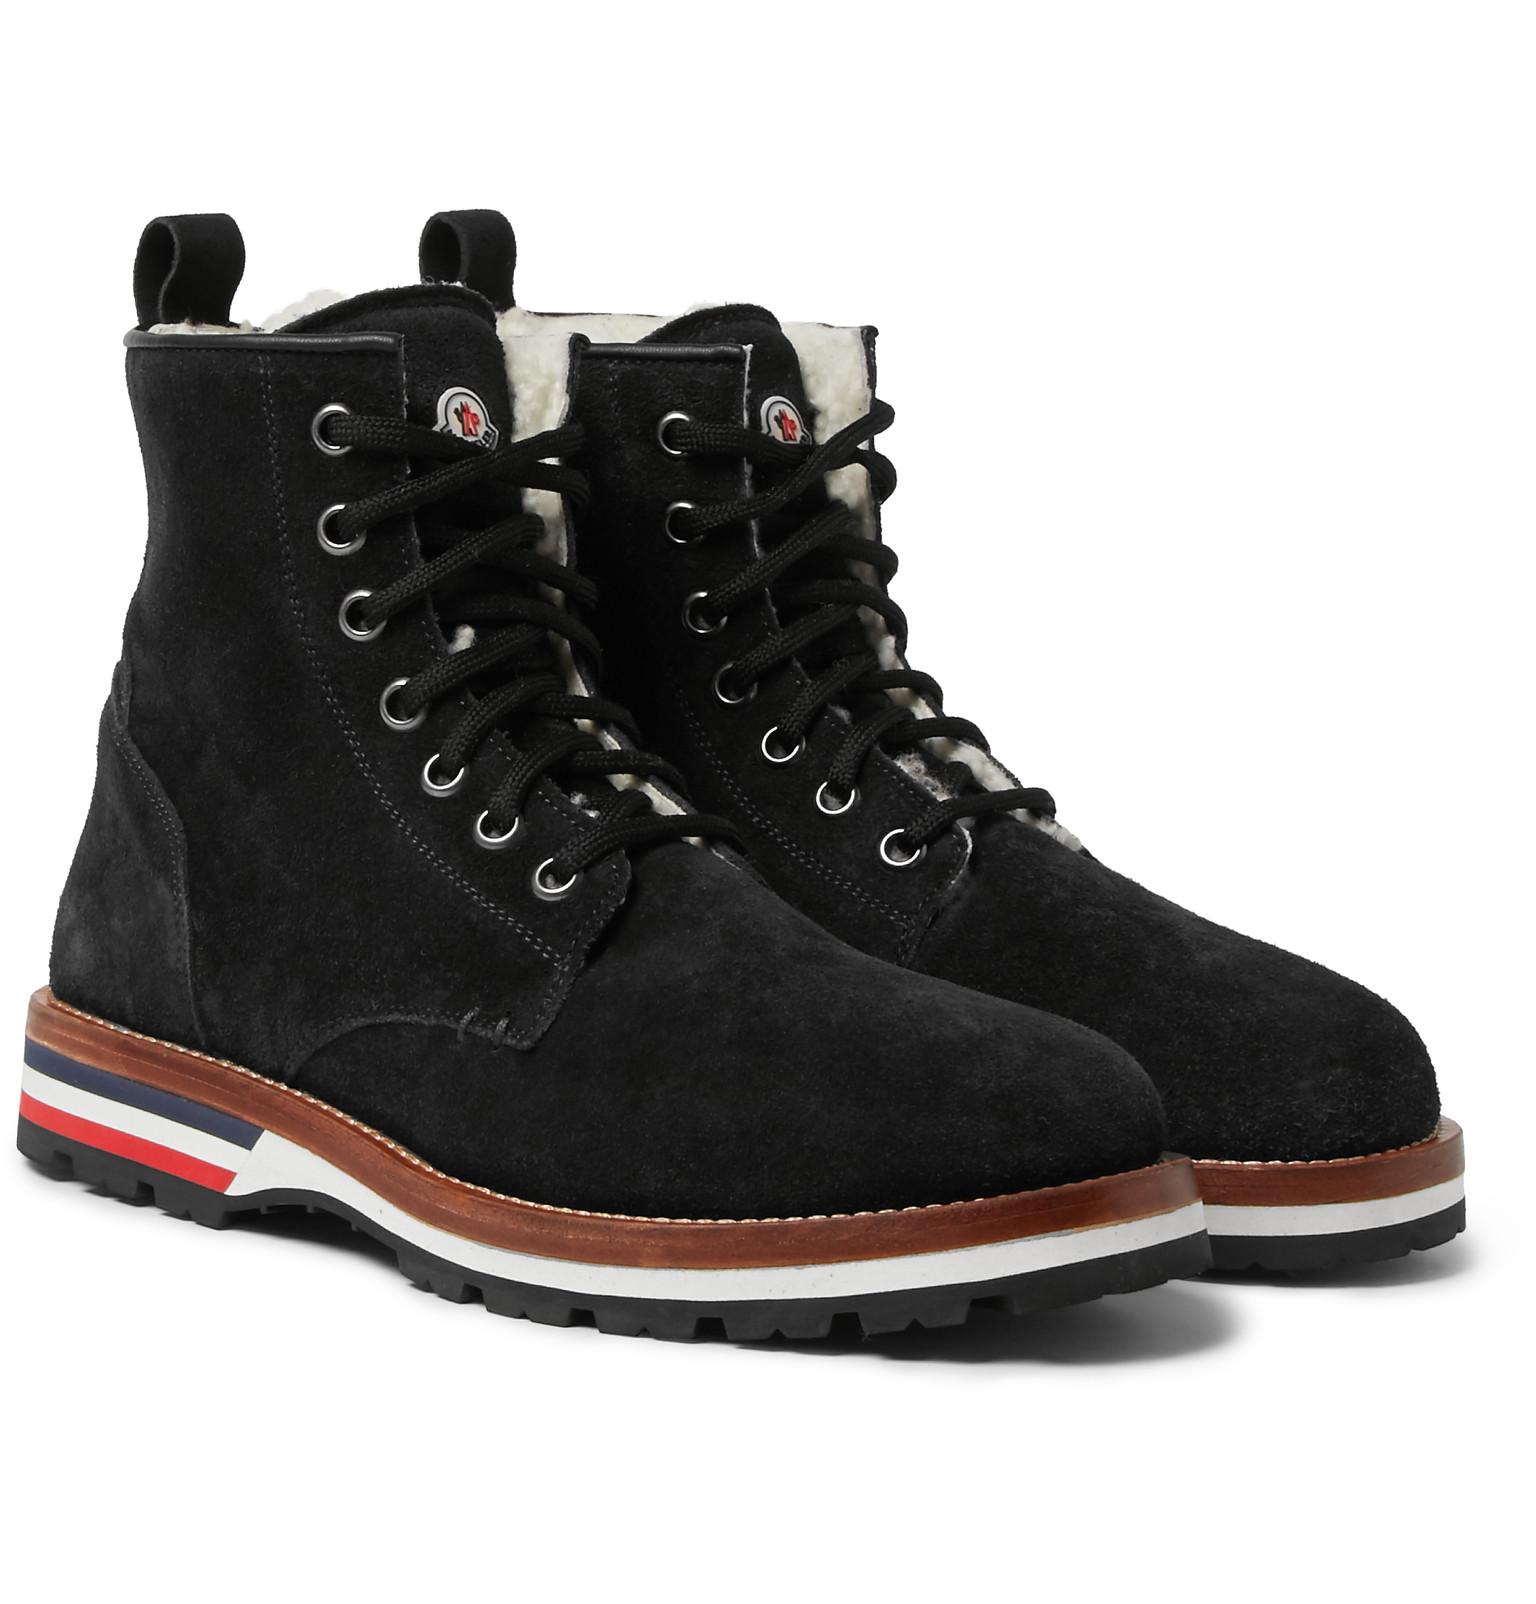 Lyst - Moncler New Vancouver Shearling-lined Suede Boots in Black for Men